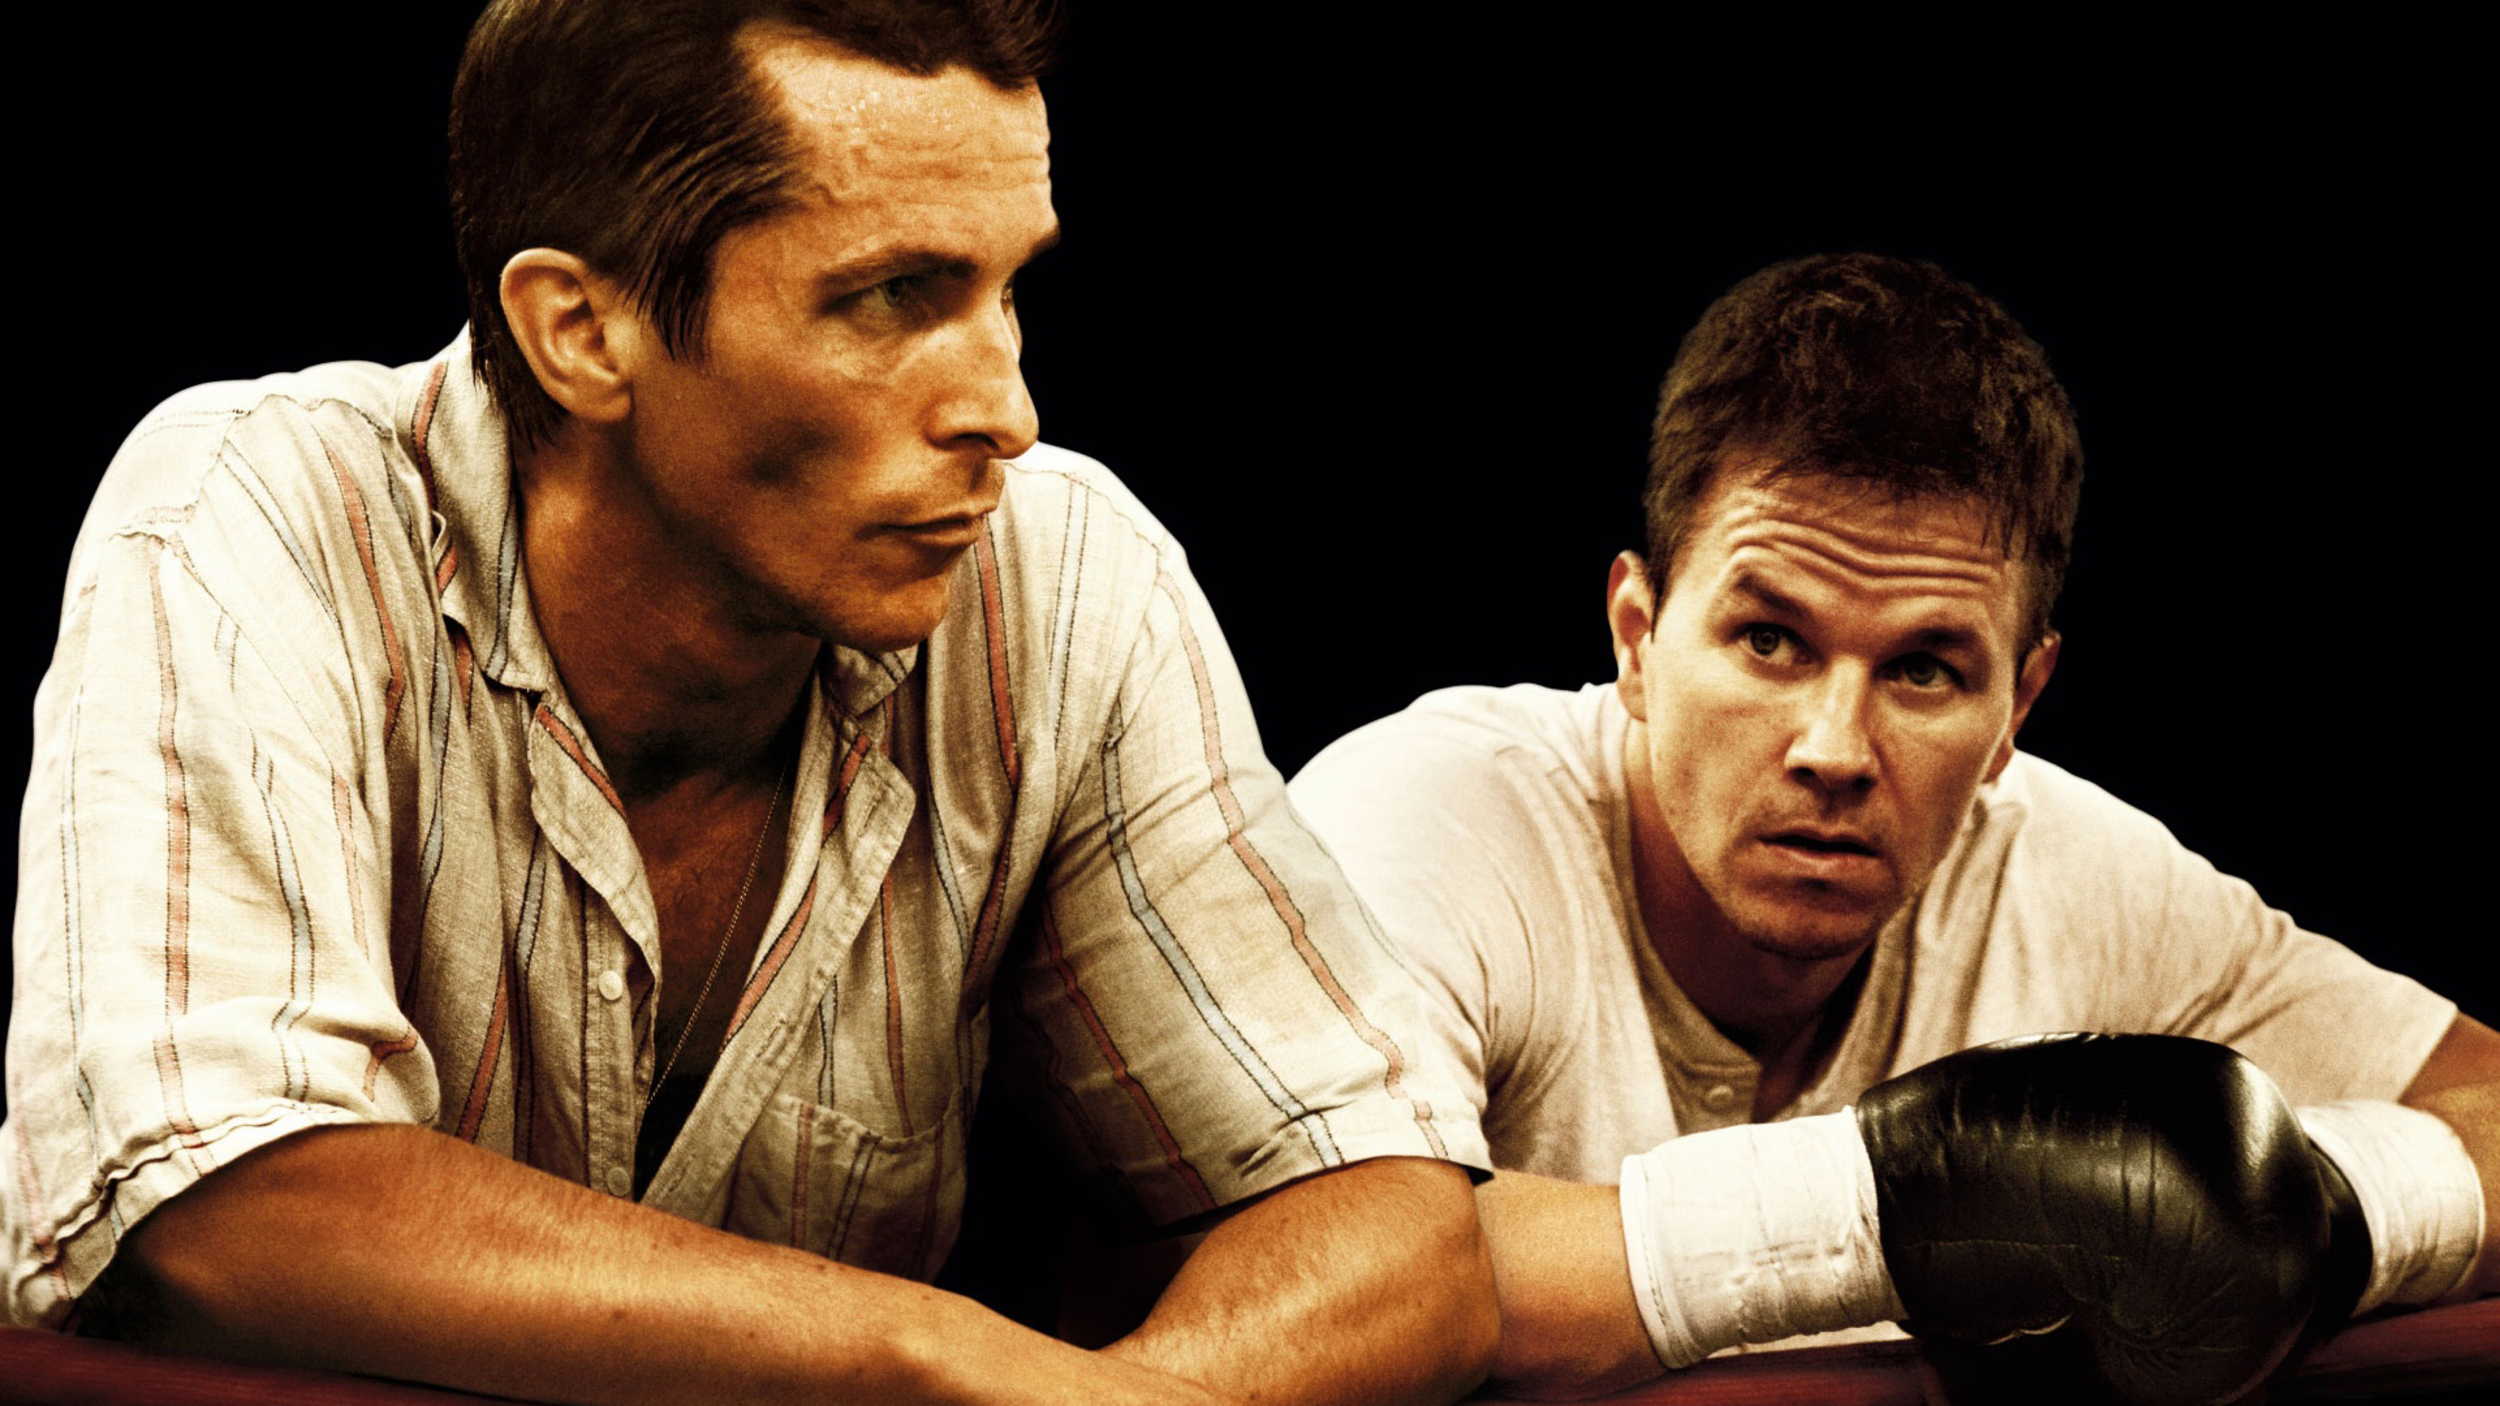 <p>Speaking of Oscar-nominated sports movies, “The Fighter” wasn’t just nominated. Two actors, Christian Bale and Melissa Leo, won for their roles in this boxing movie. They are both excellent, and the film also features Amy Adams and Mark Wahlberg. Micky Ward isn’t the most famous real athlete, but this was an engrossing biopic nevertheless.</p><p>You may also like: <a href='https://www.yardbarker.com/nhl/articles/every_nhl_player_to_play_in_his_40s_032824/s1__31632503'>Every NHL player to play in his 40s</a></p>